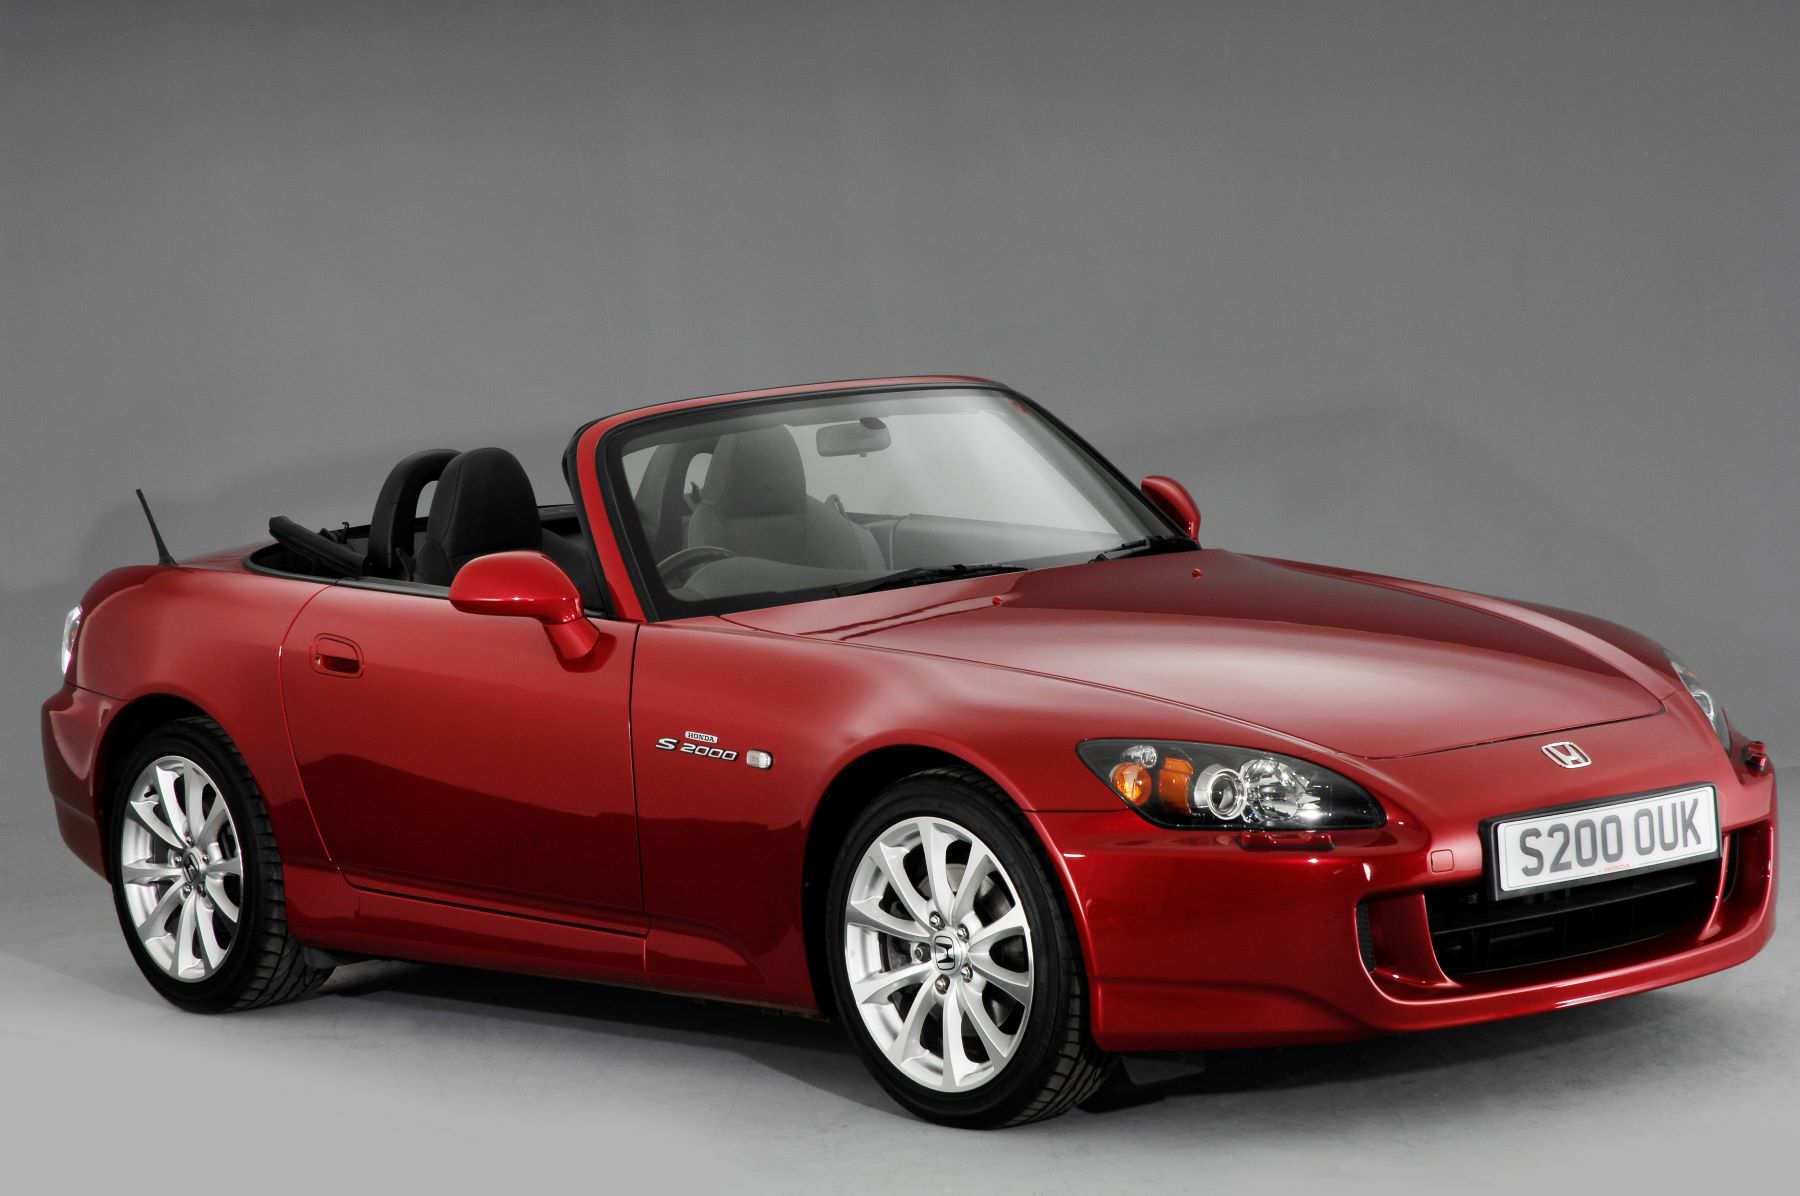 A red 2007 Honda S2000 coupe convertible model featured from the National Motor Museum